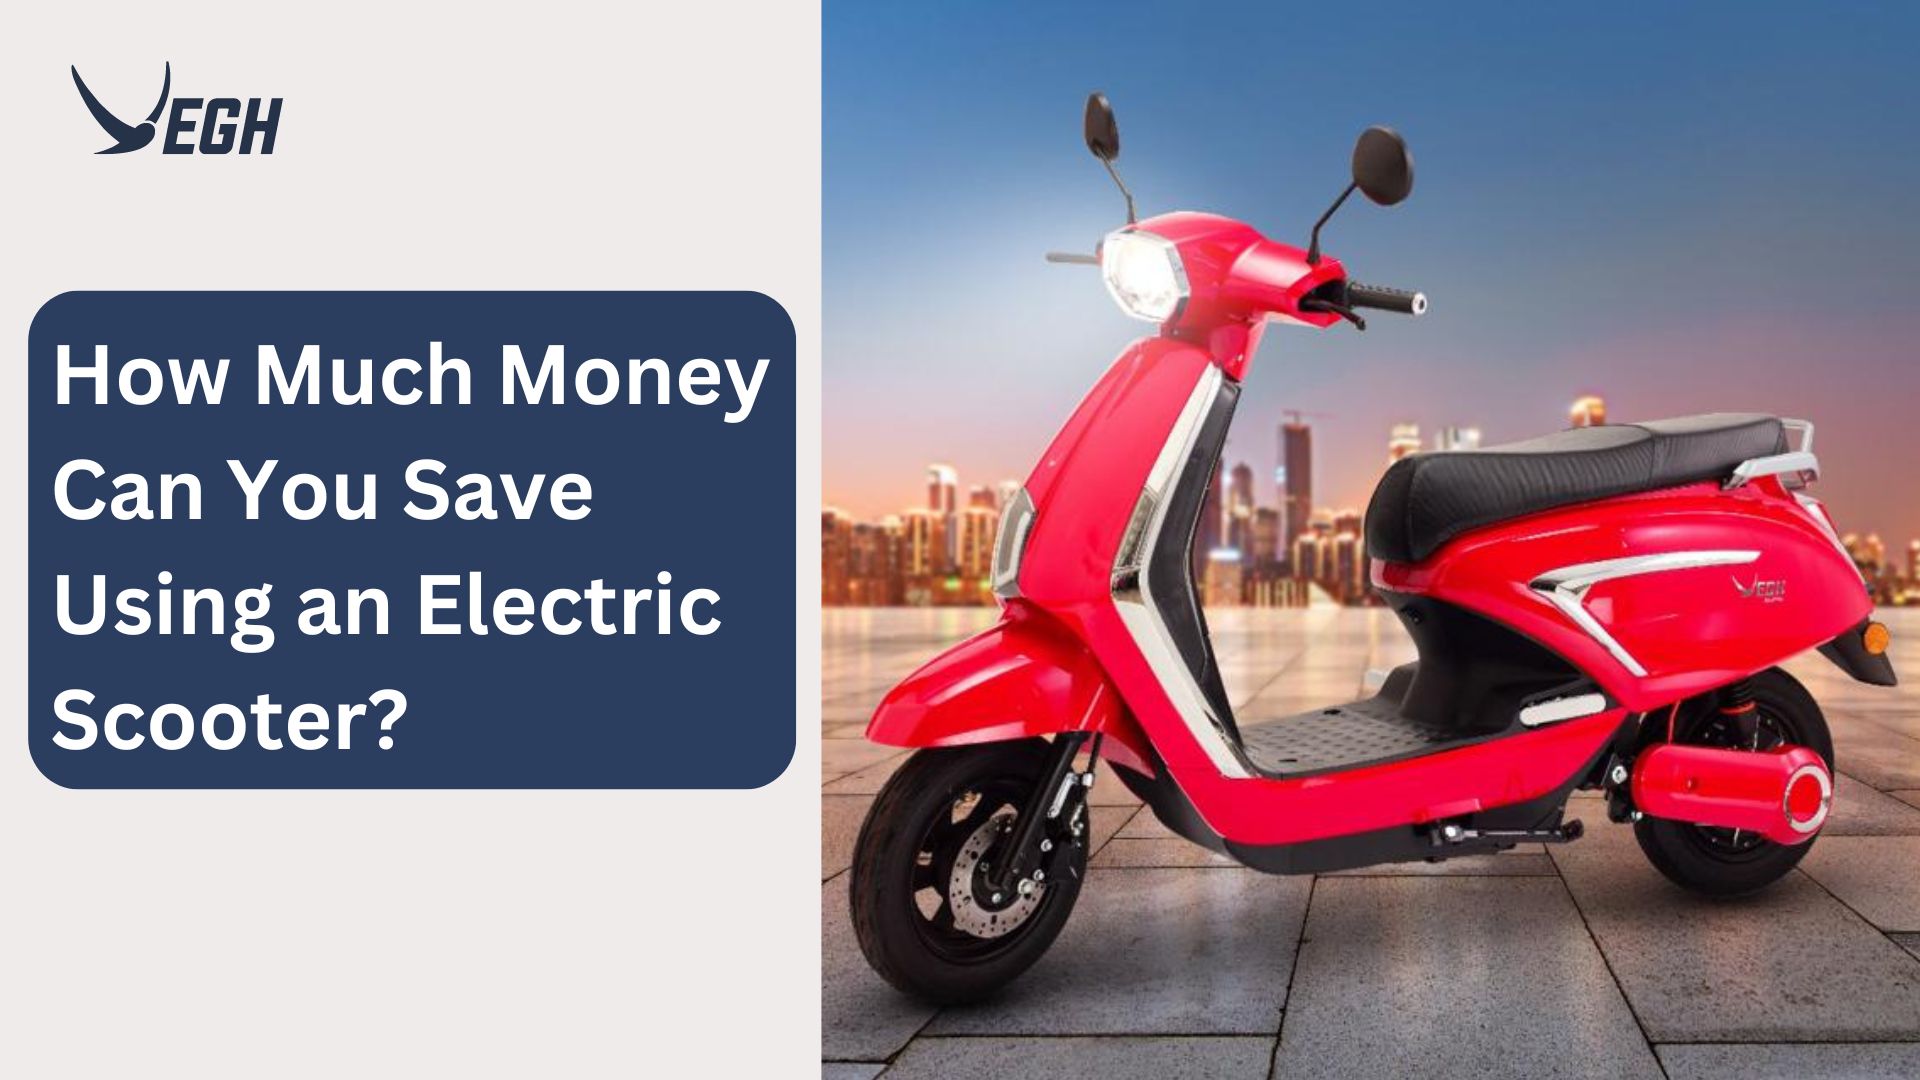 How Much Money Can You Save Using an Electric Scooter?